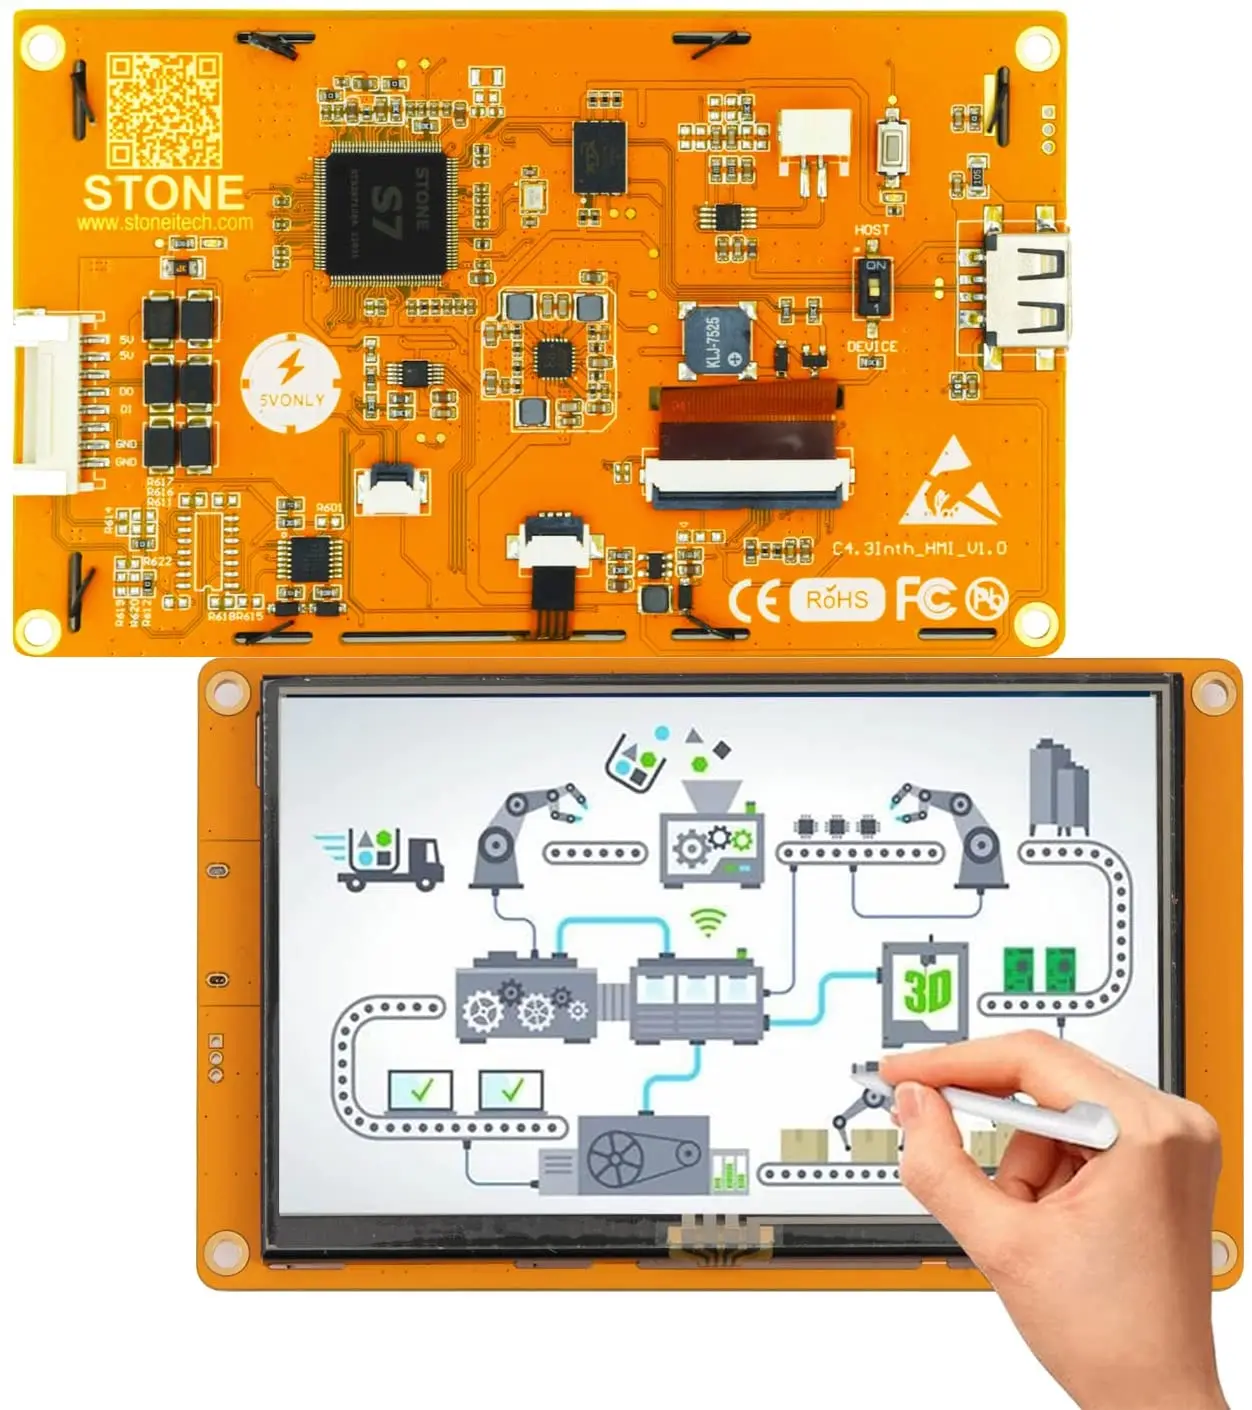 4.3 Inch Smart HMI LCD Touch Display with Program + Touch Screen for Equipment Control Panel